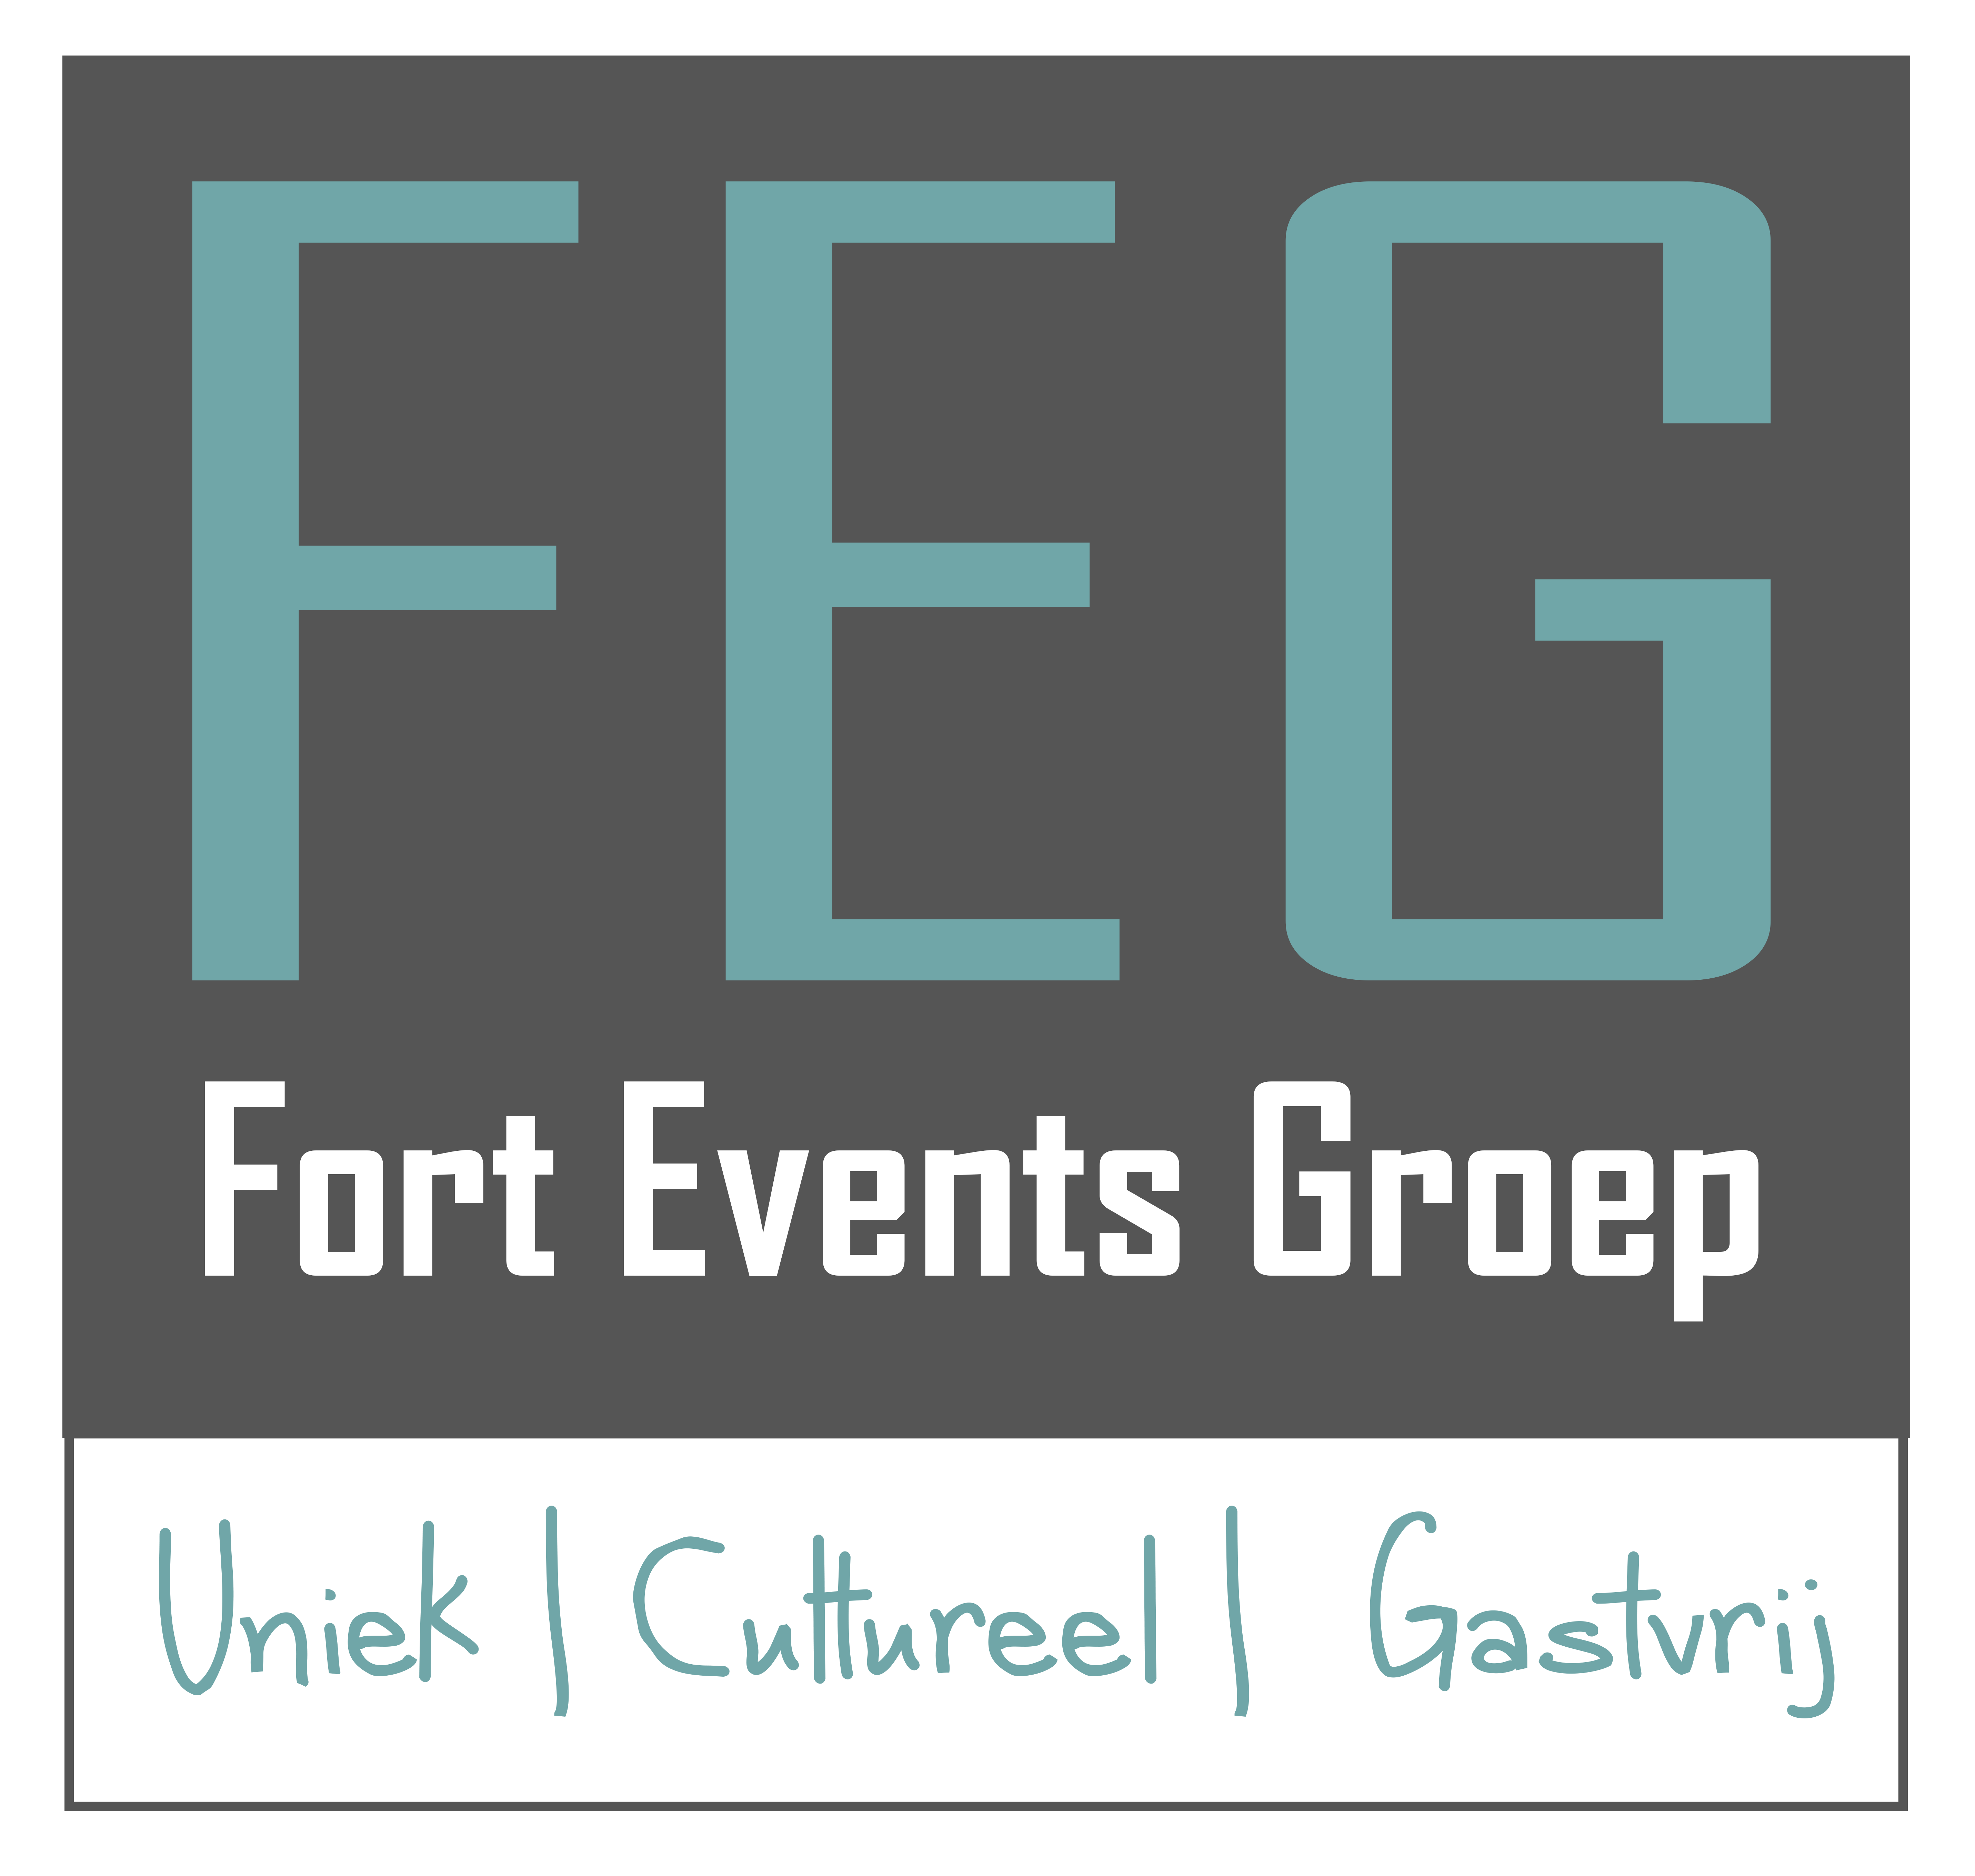 Fort Events Groep